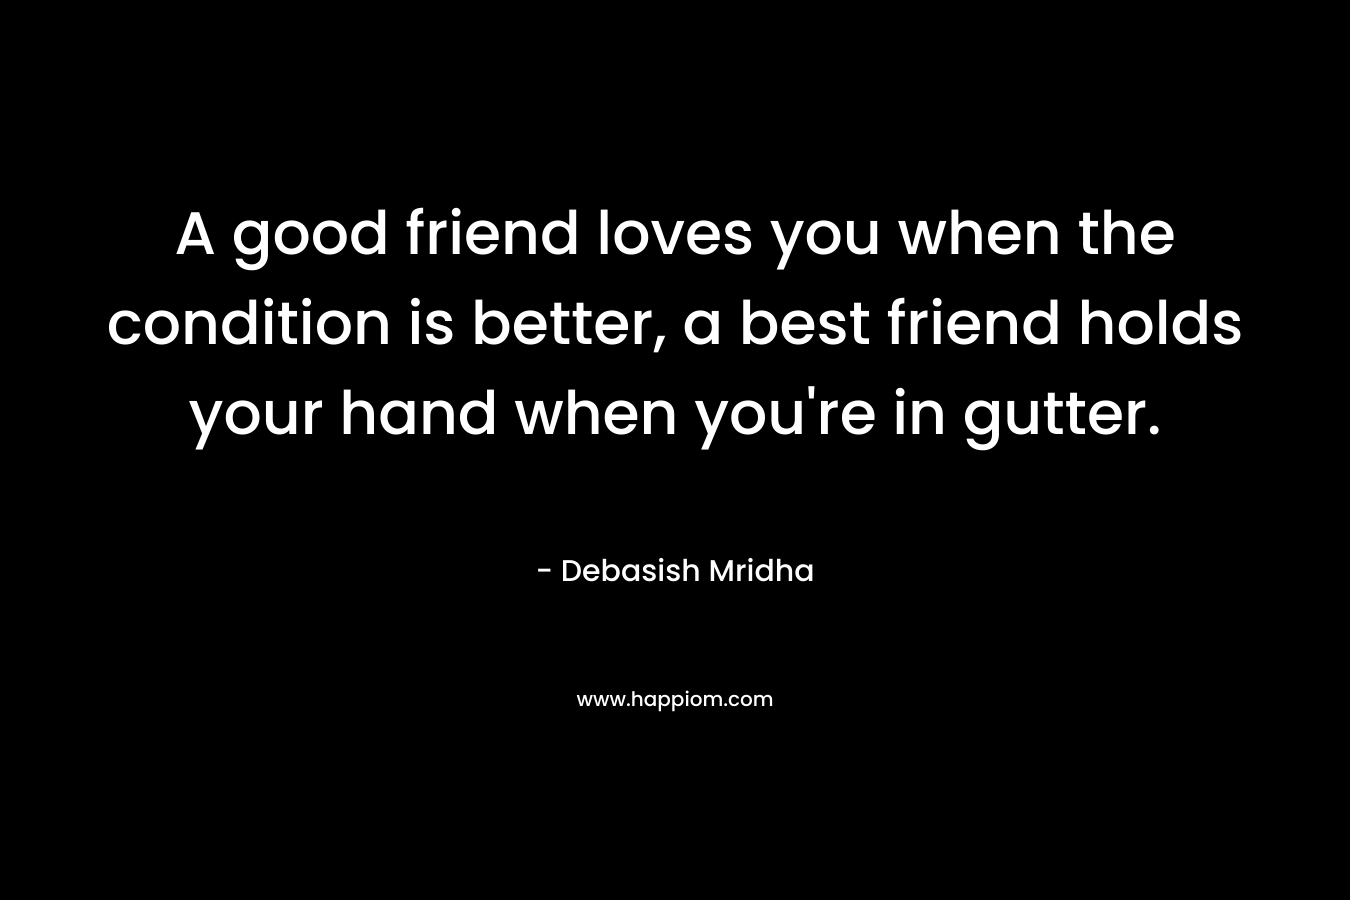 A good friend loves you when the condition is better, a best friend holds your hand when you're in gutter.